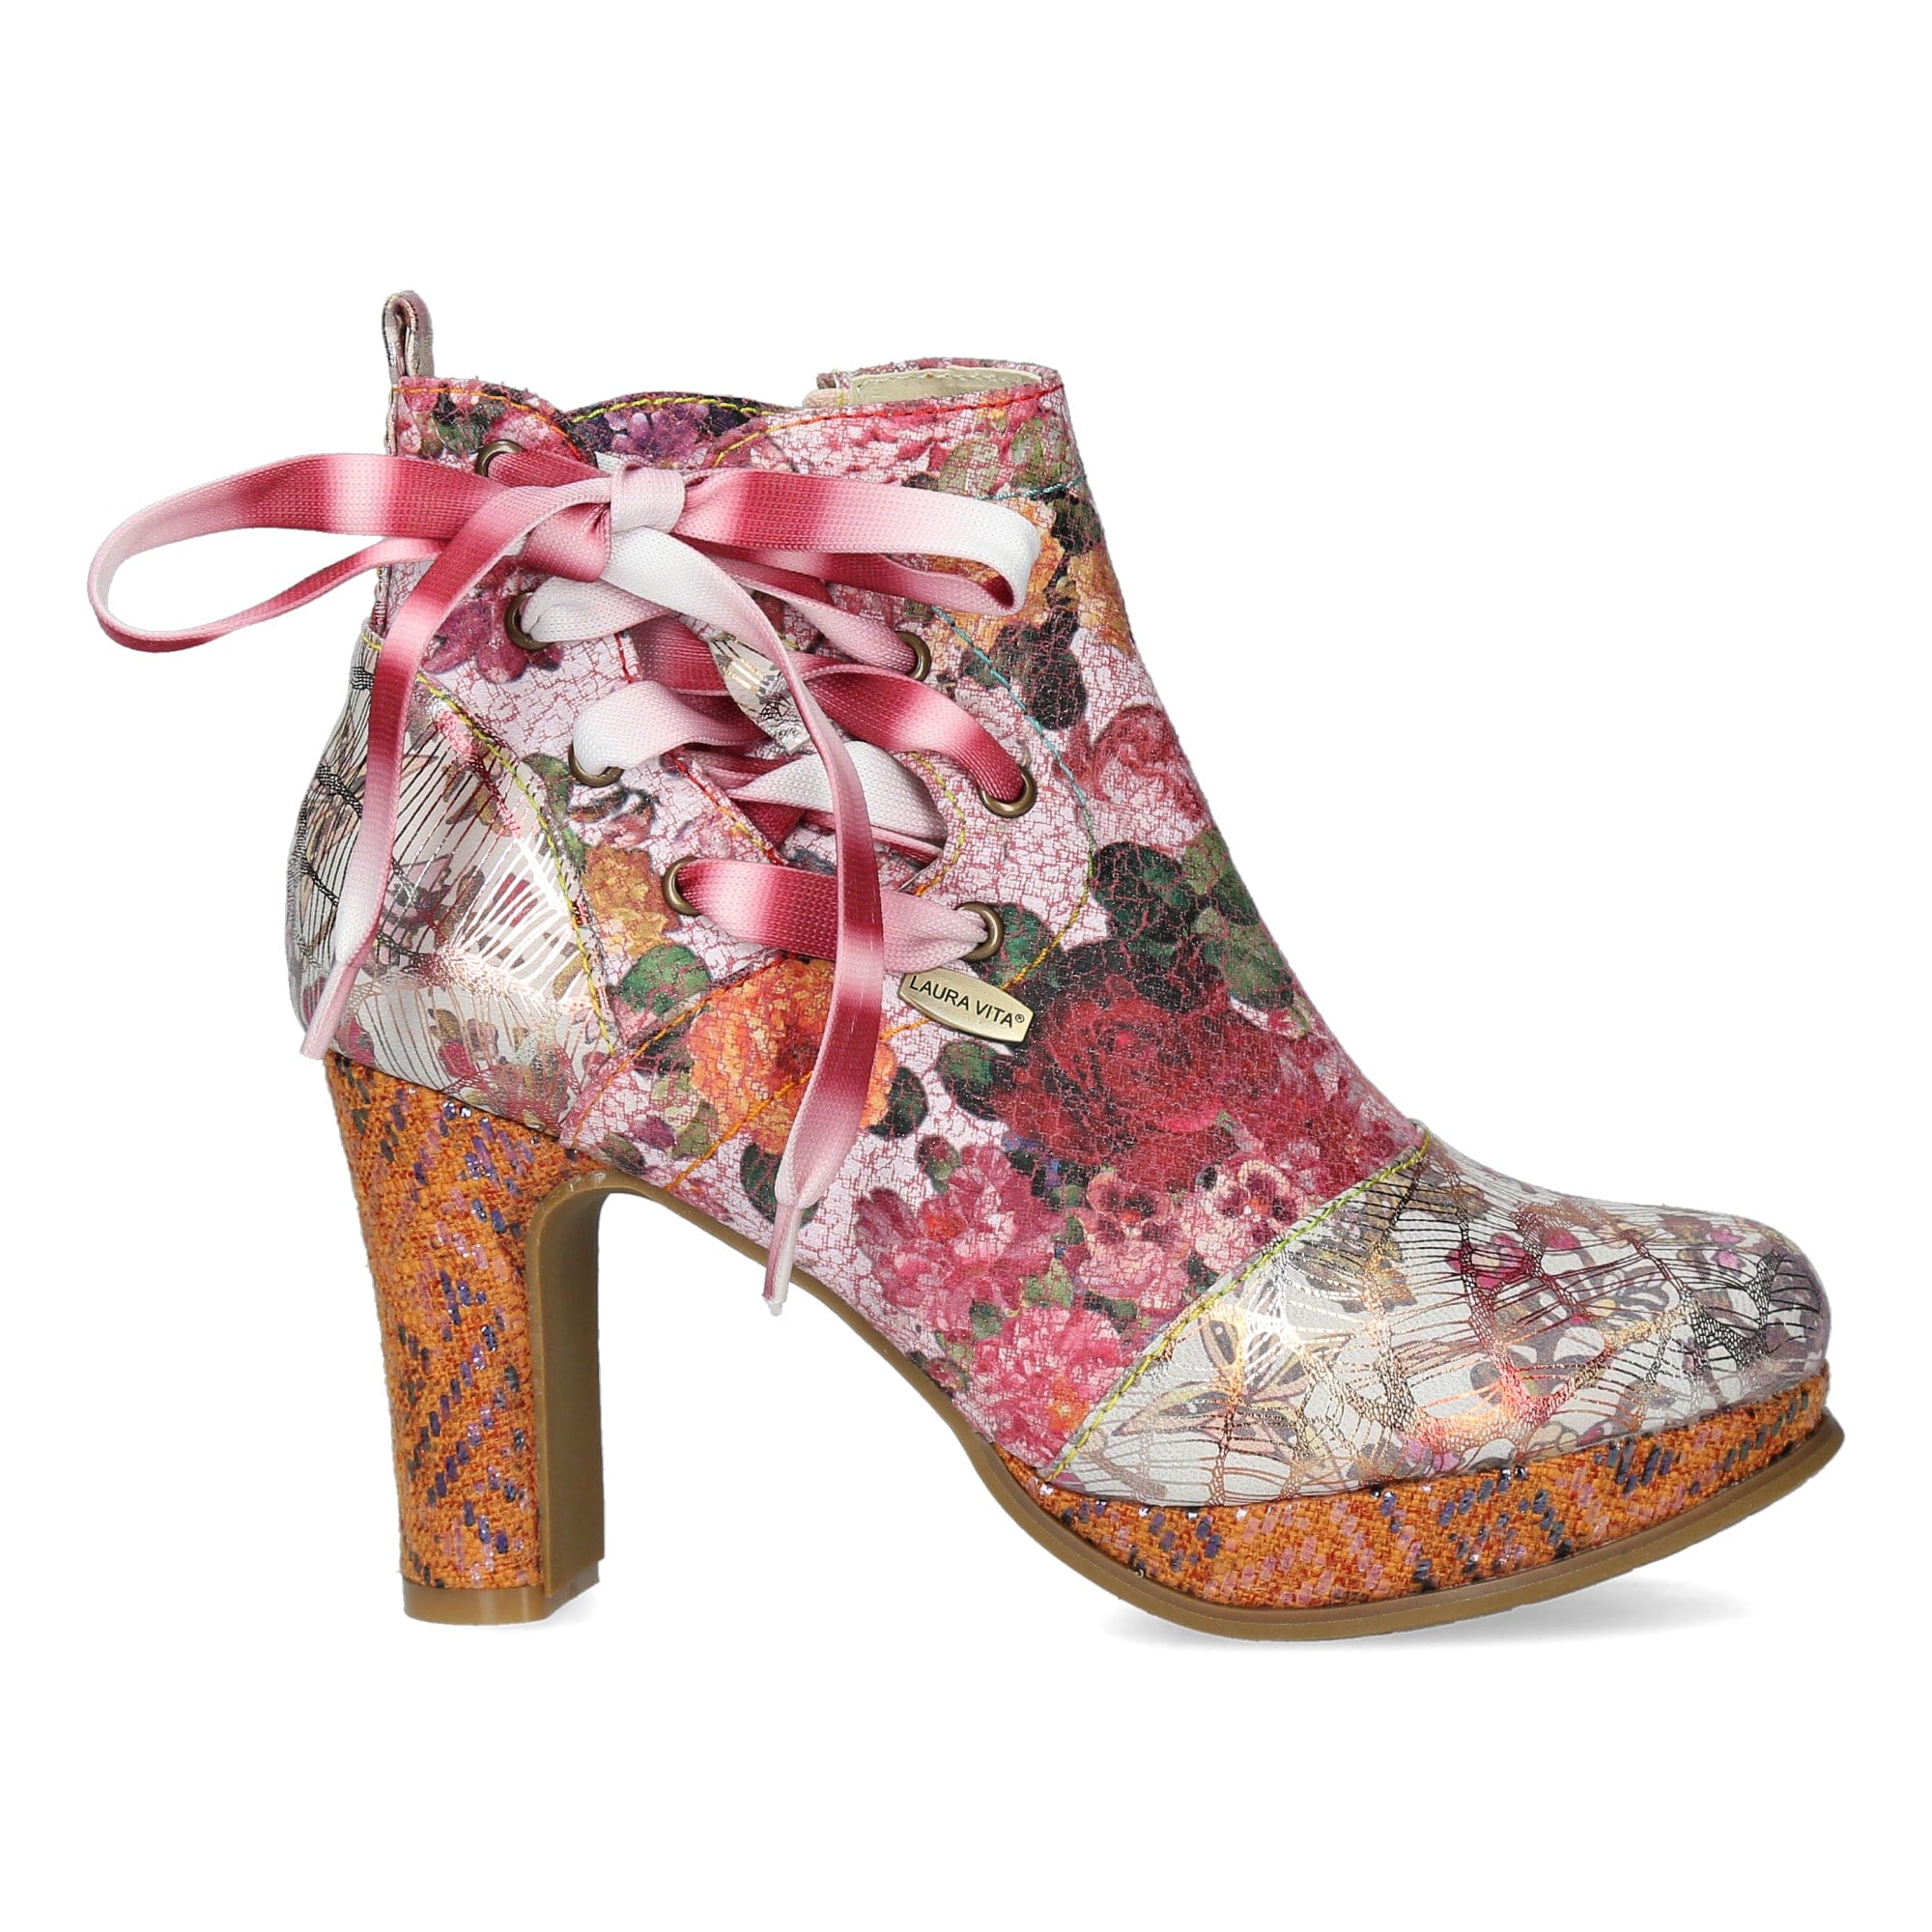 Chaussure HICAO 0522 - 35 / Rose - Boots